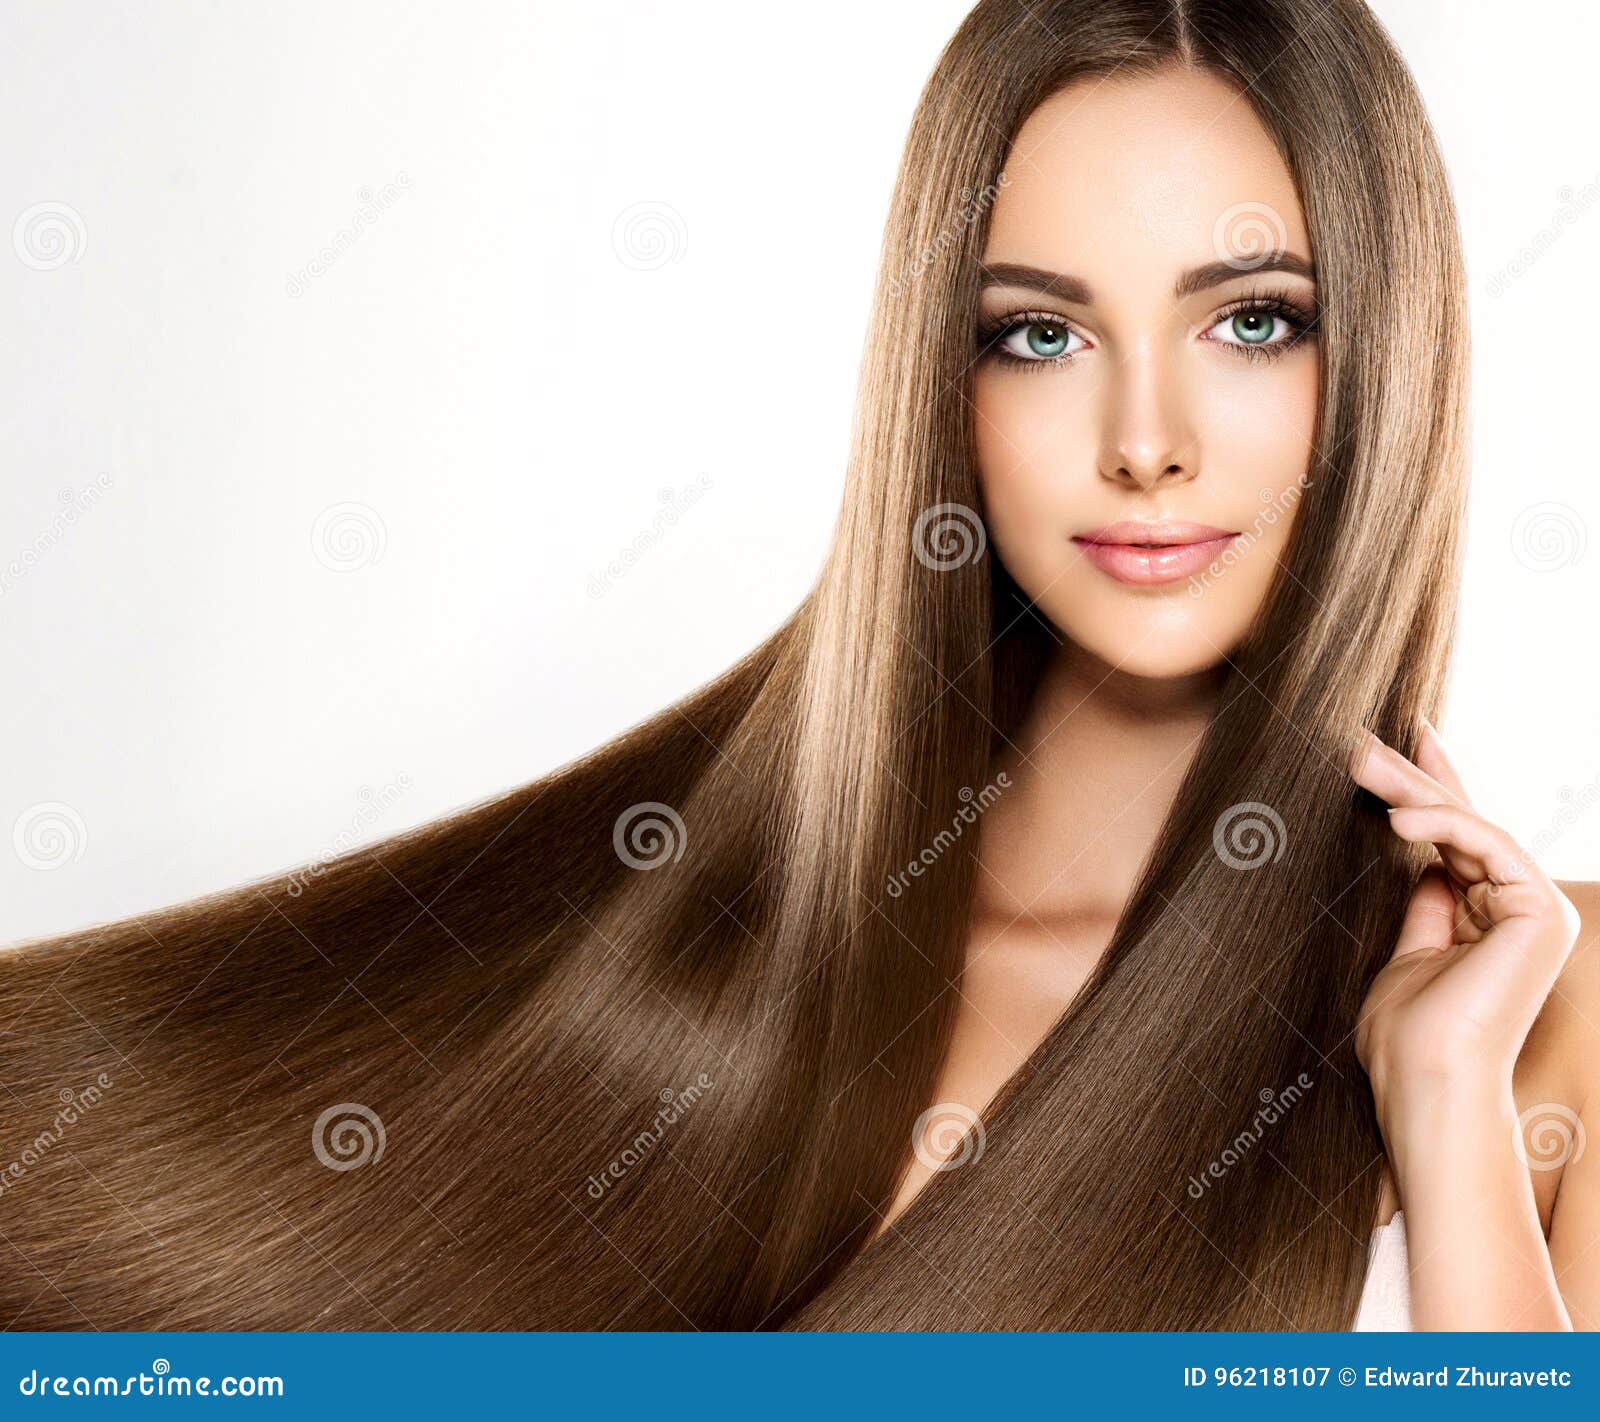 young attractive girl-model with gorgeous, shiny, long, hair.